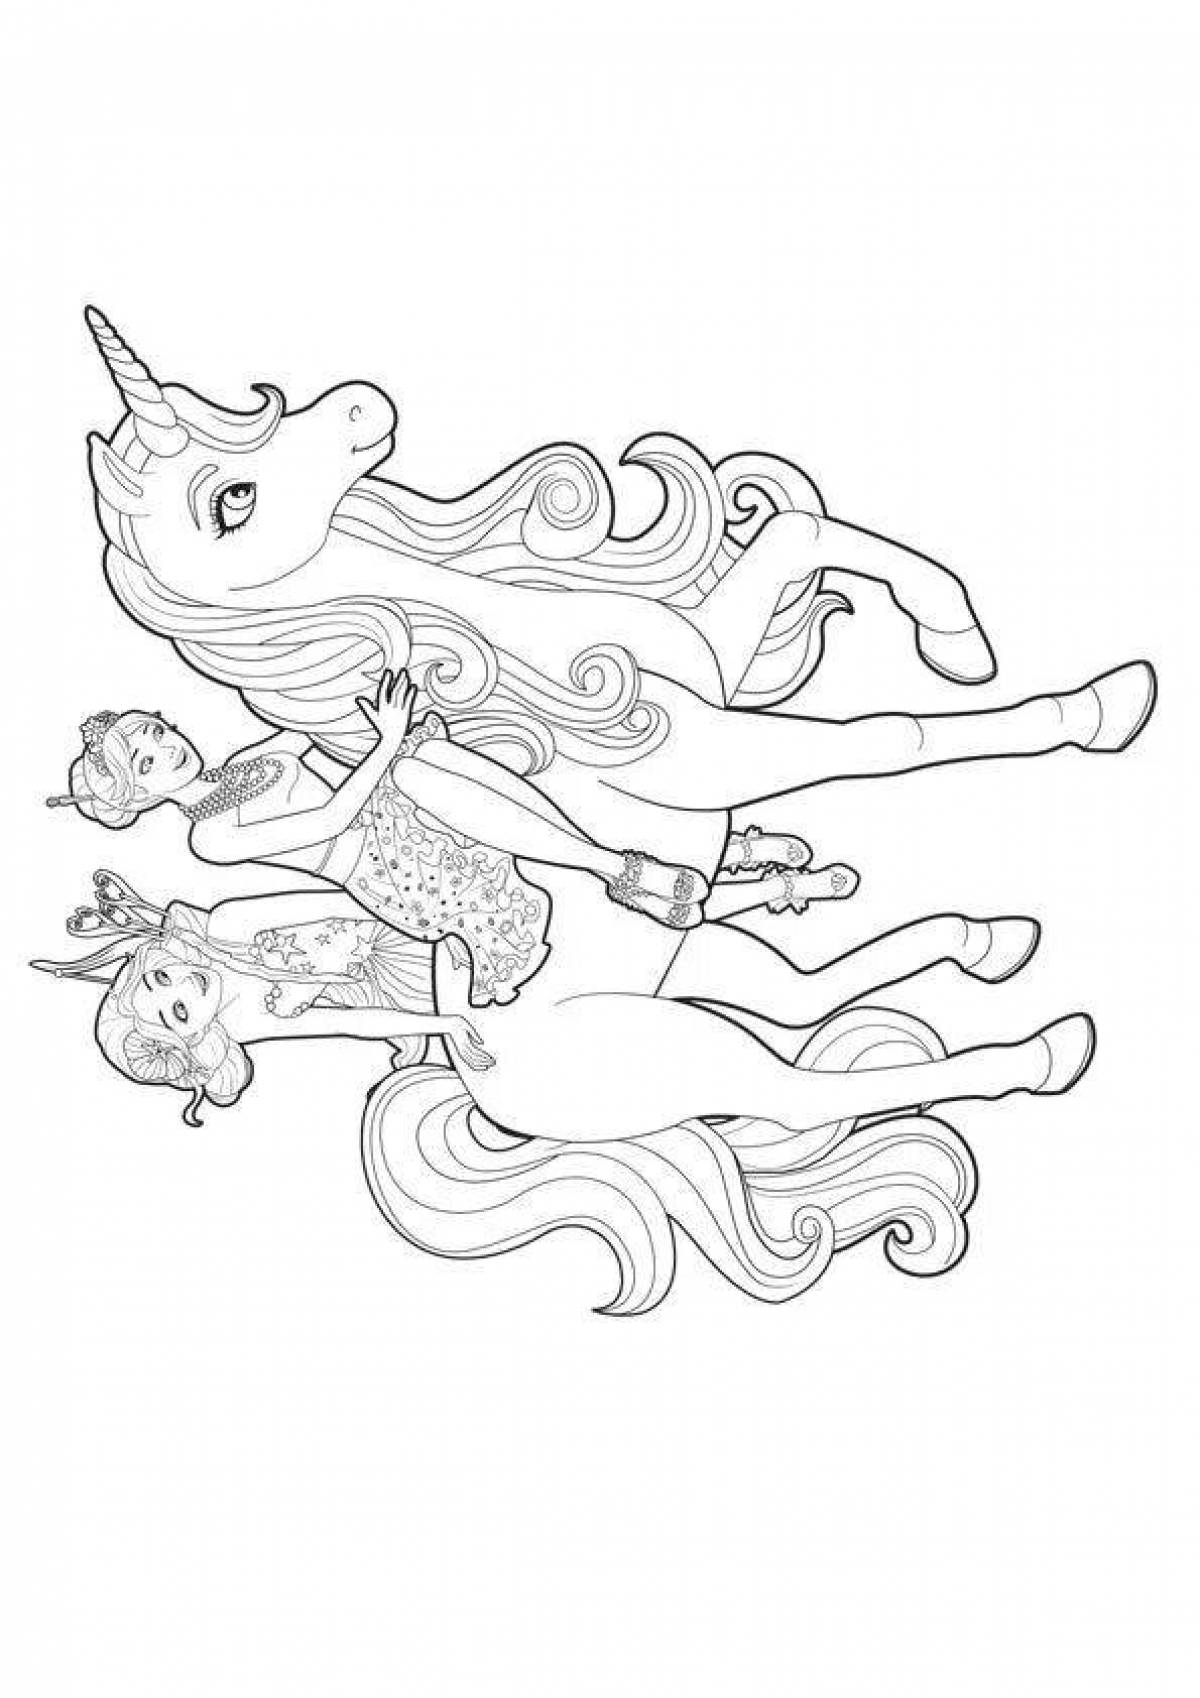 Delightful coloring barbie with a unicorn